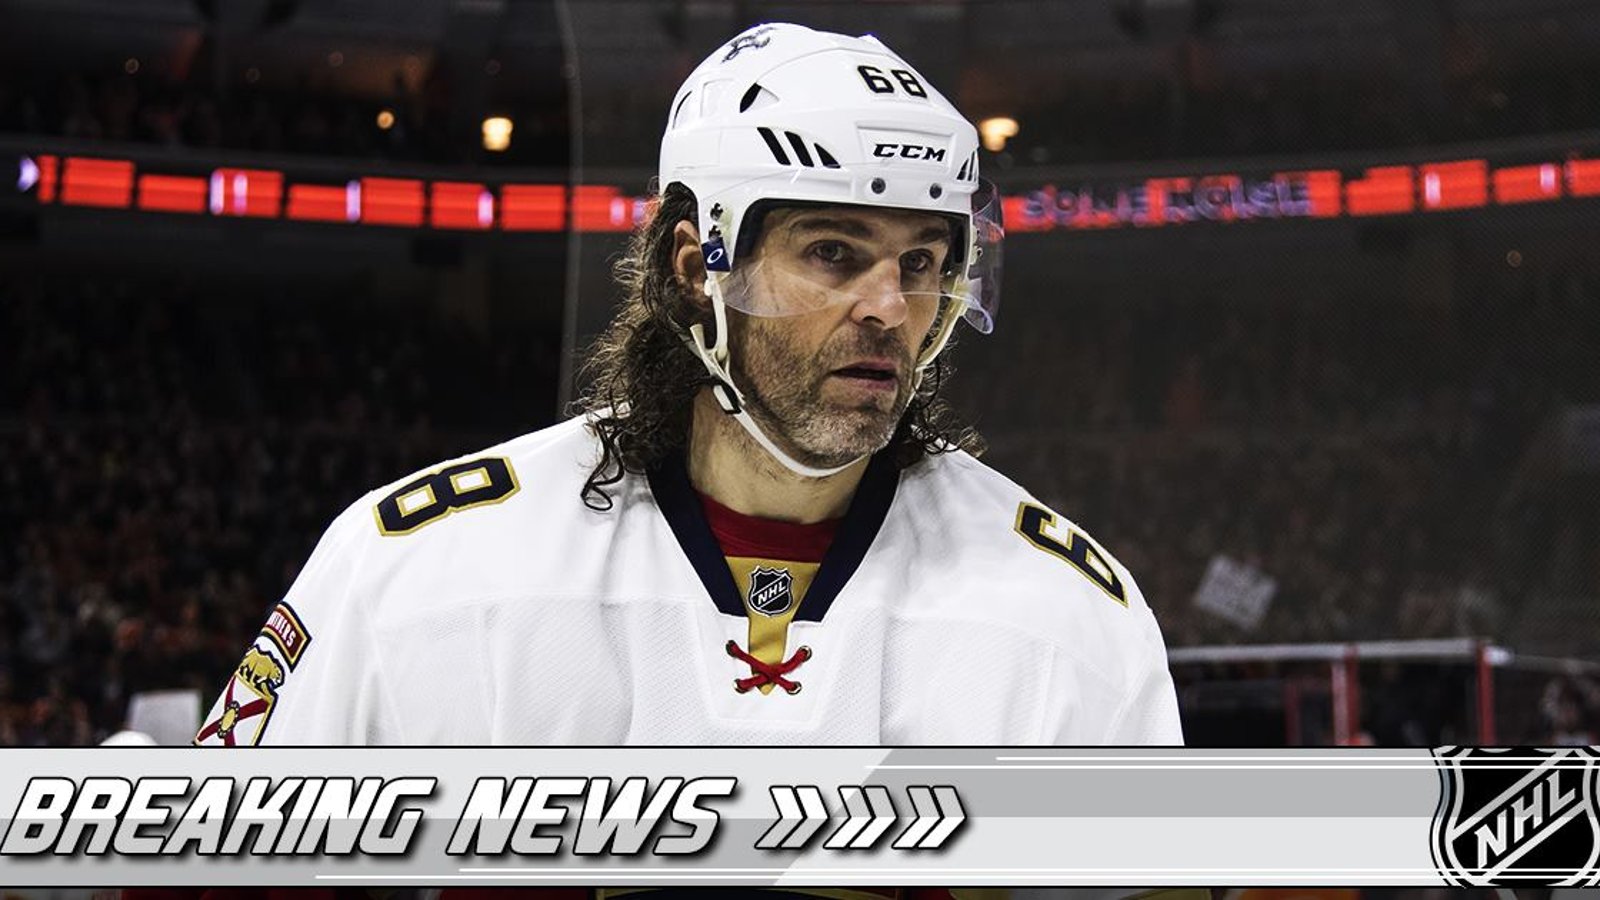 Rumor: A potential hint about Jagr signing with NHL team.